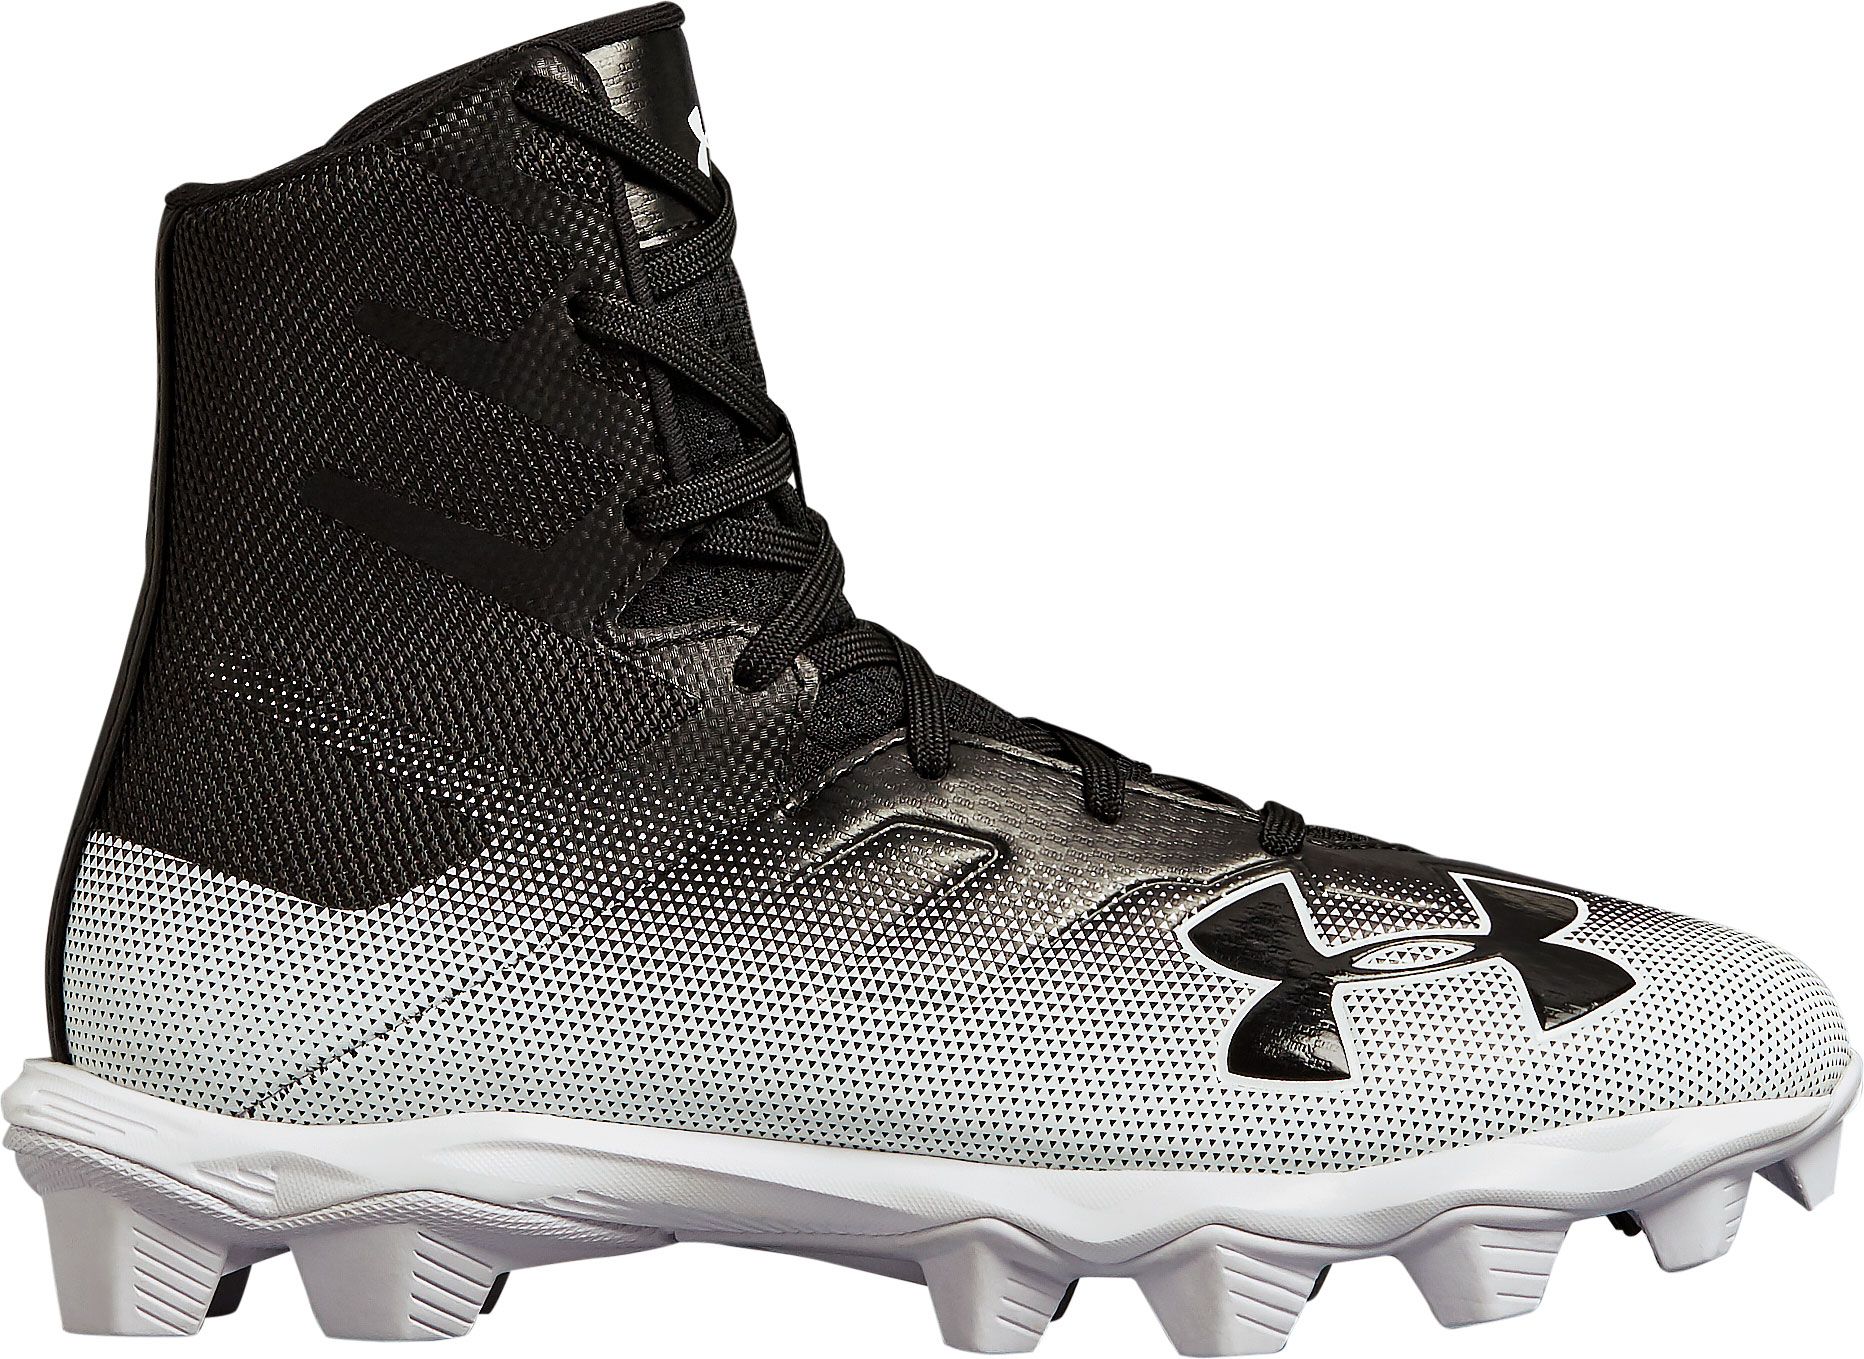 under armor youth cleats